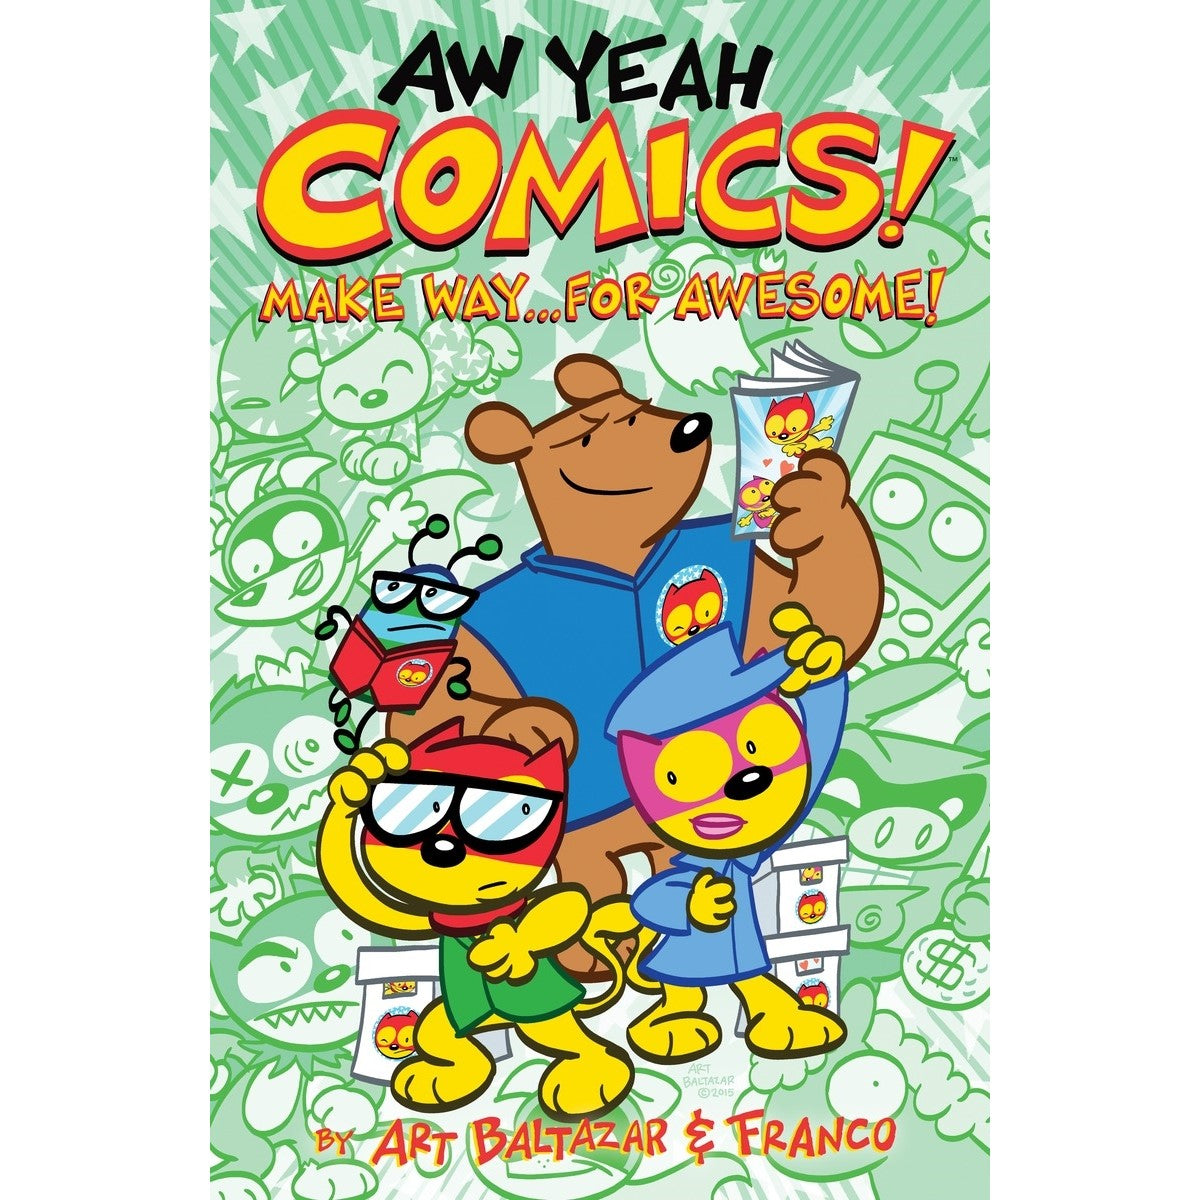 Aw Yeah Comics! Volume 3 Make Way... For Awesome! (TPaperback)